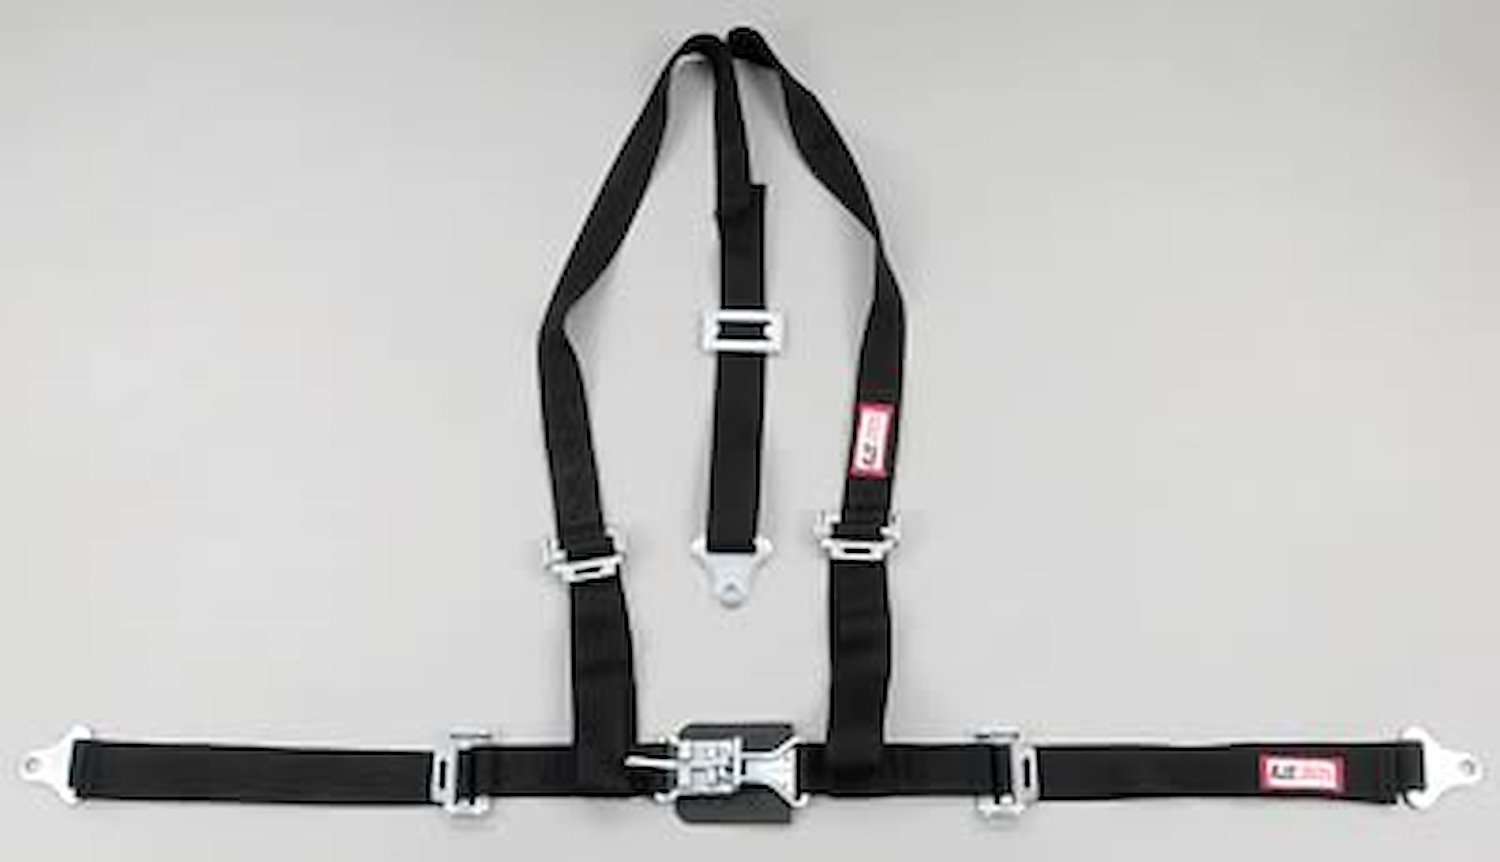 NON-SFI L&L HARNESS 3 PULL DOWN Lap Belt SNAP SEWN IN 2 S.H. Individual FLOOR Mount w/STERNUM STRAP WRAP/SNAP RED